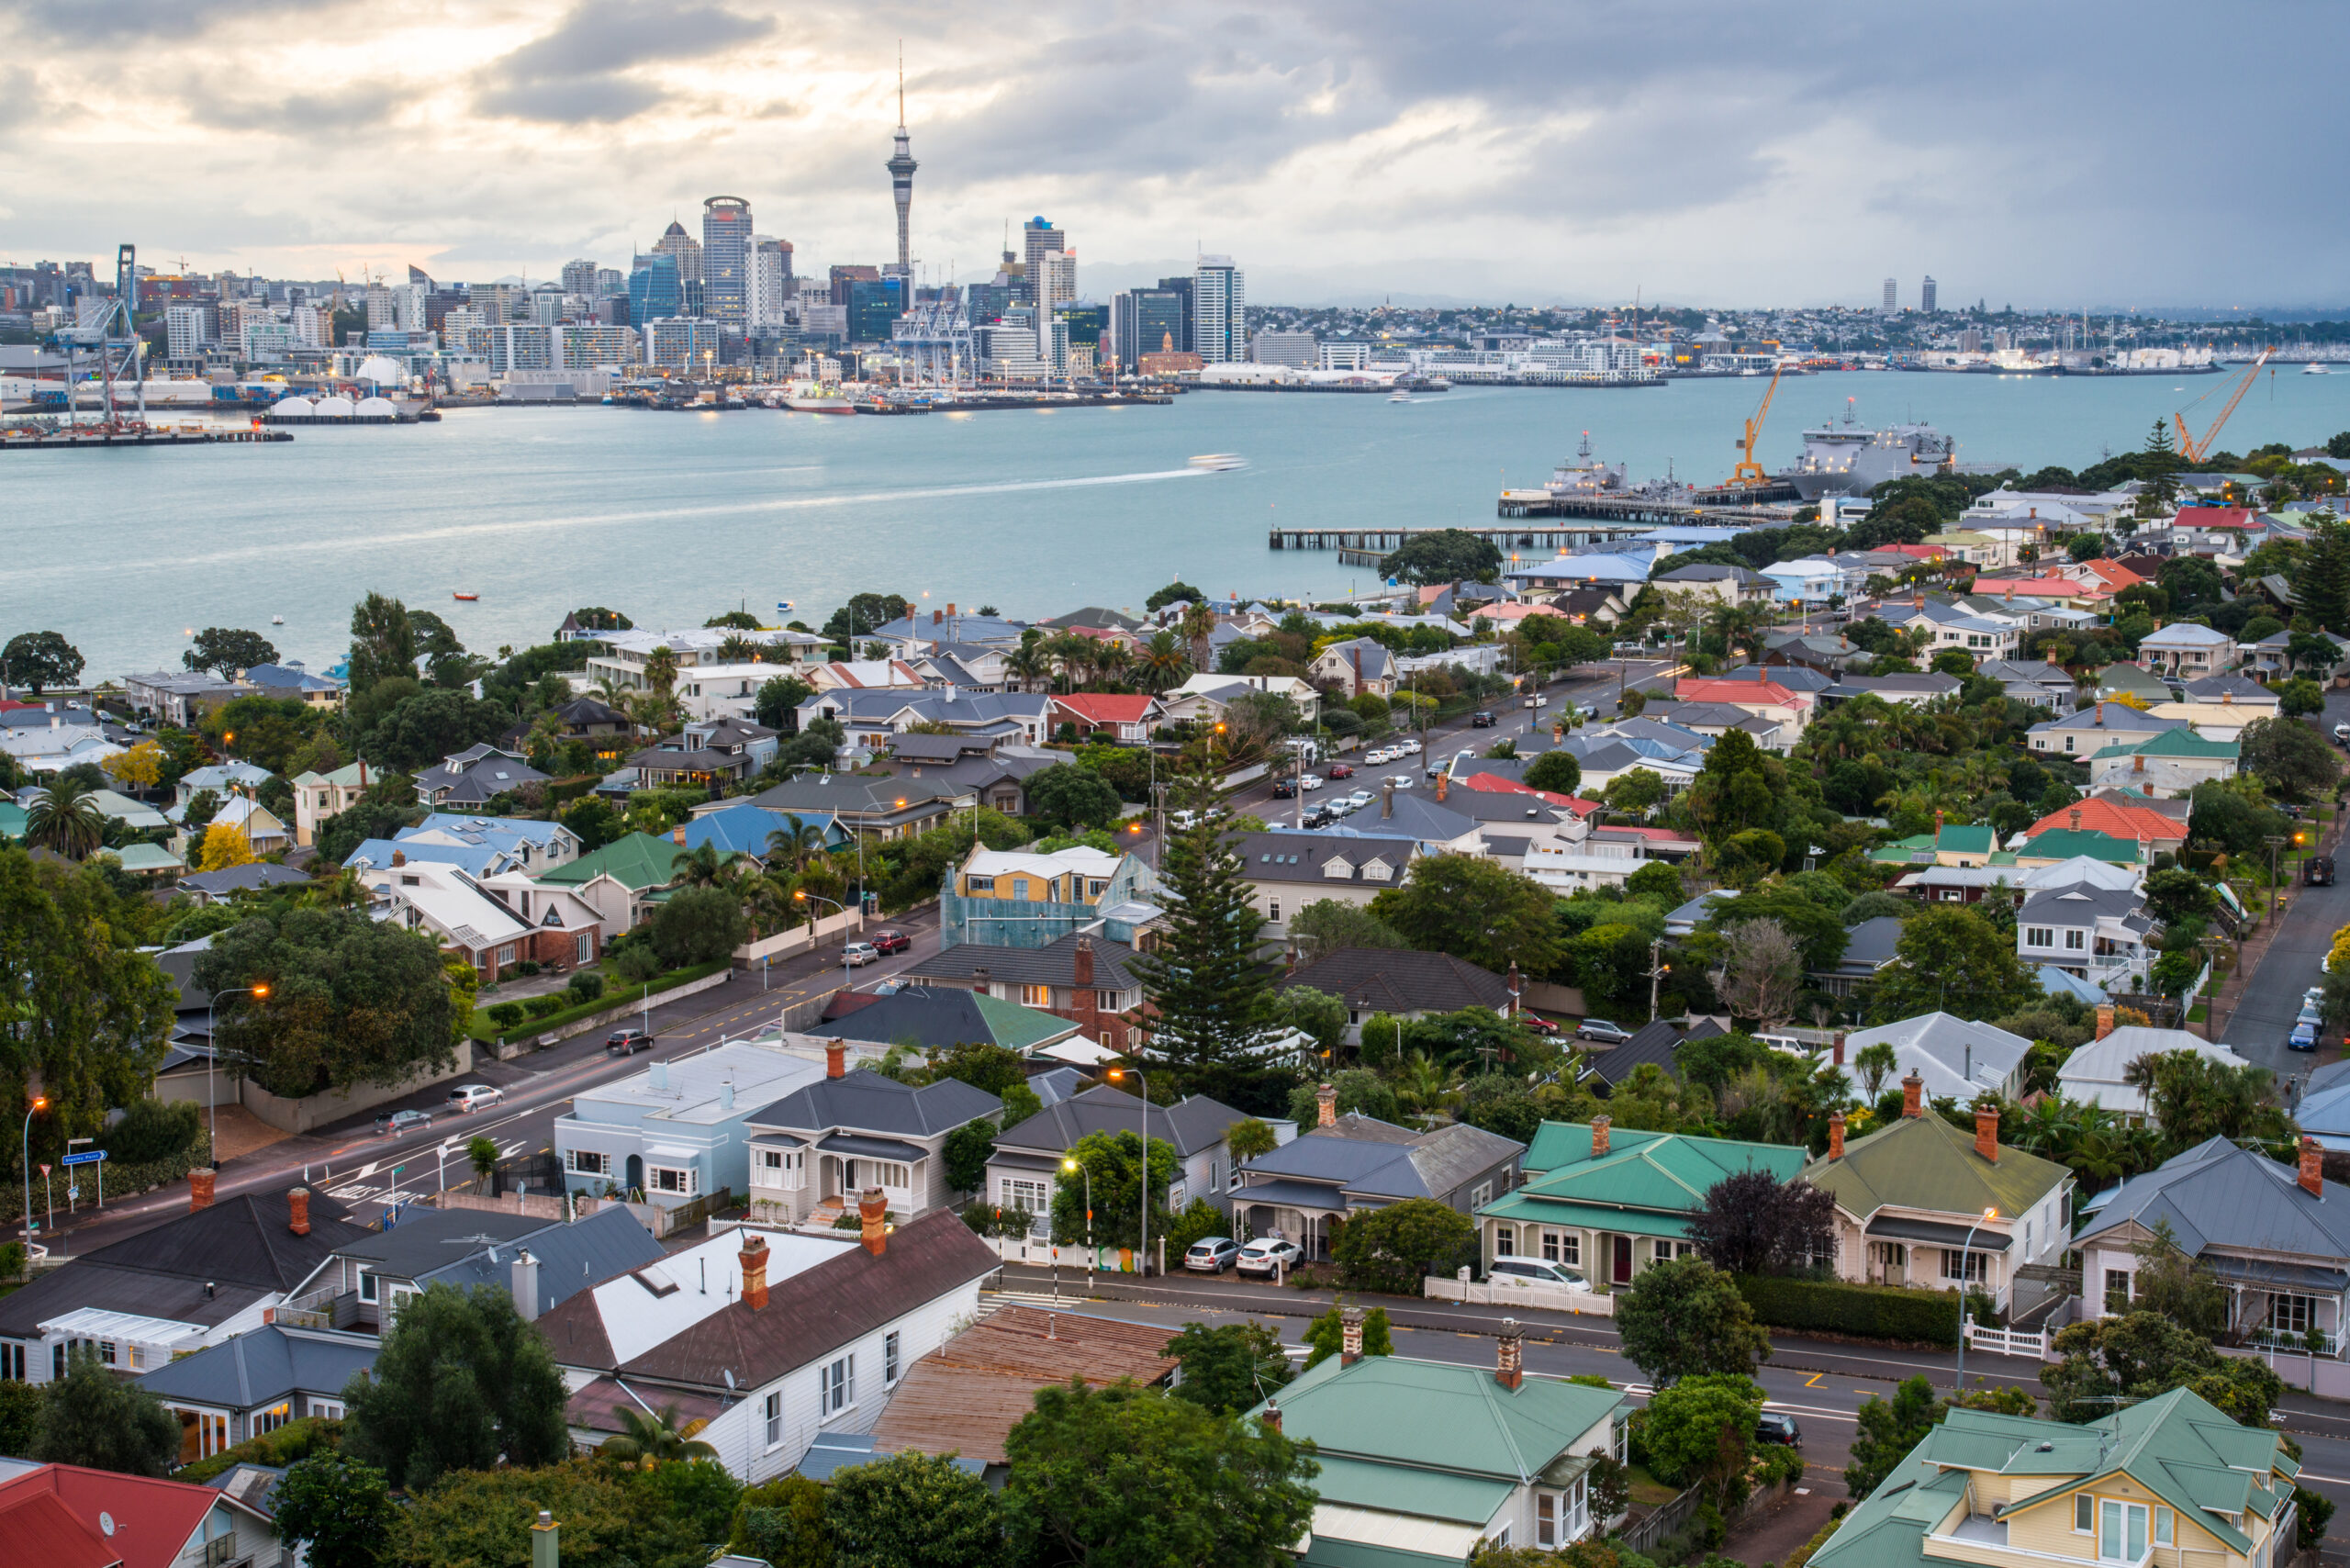 How does housing affordability in Australia rank on world stage?